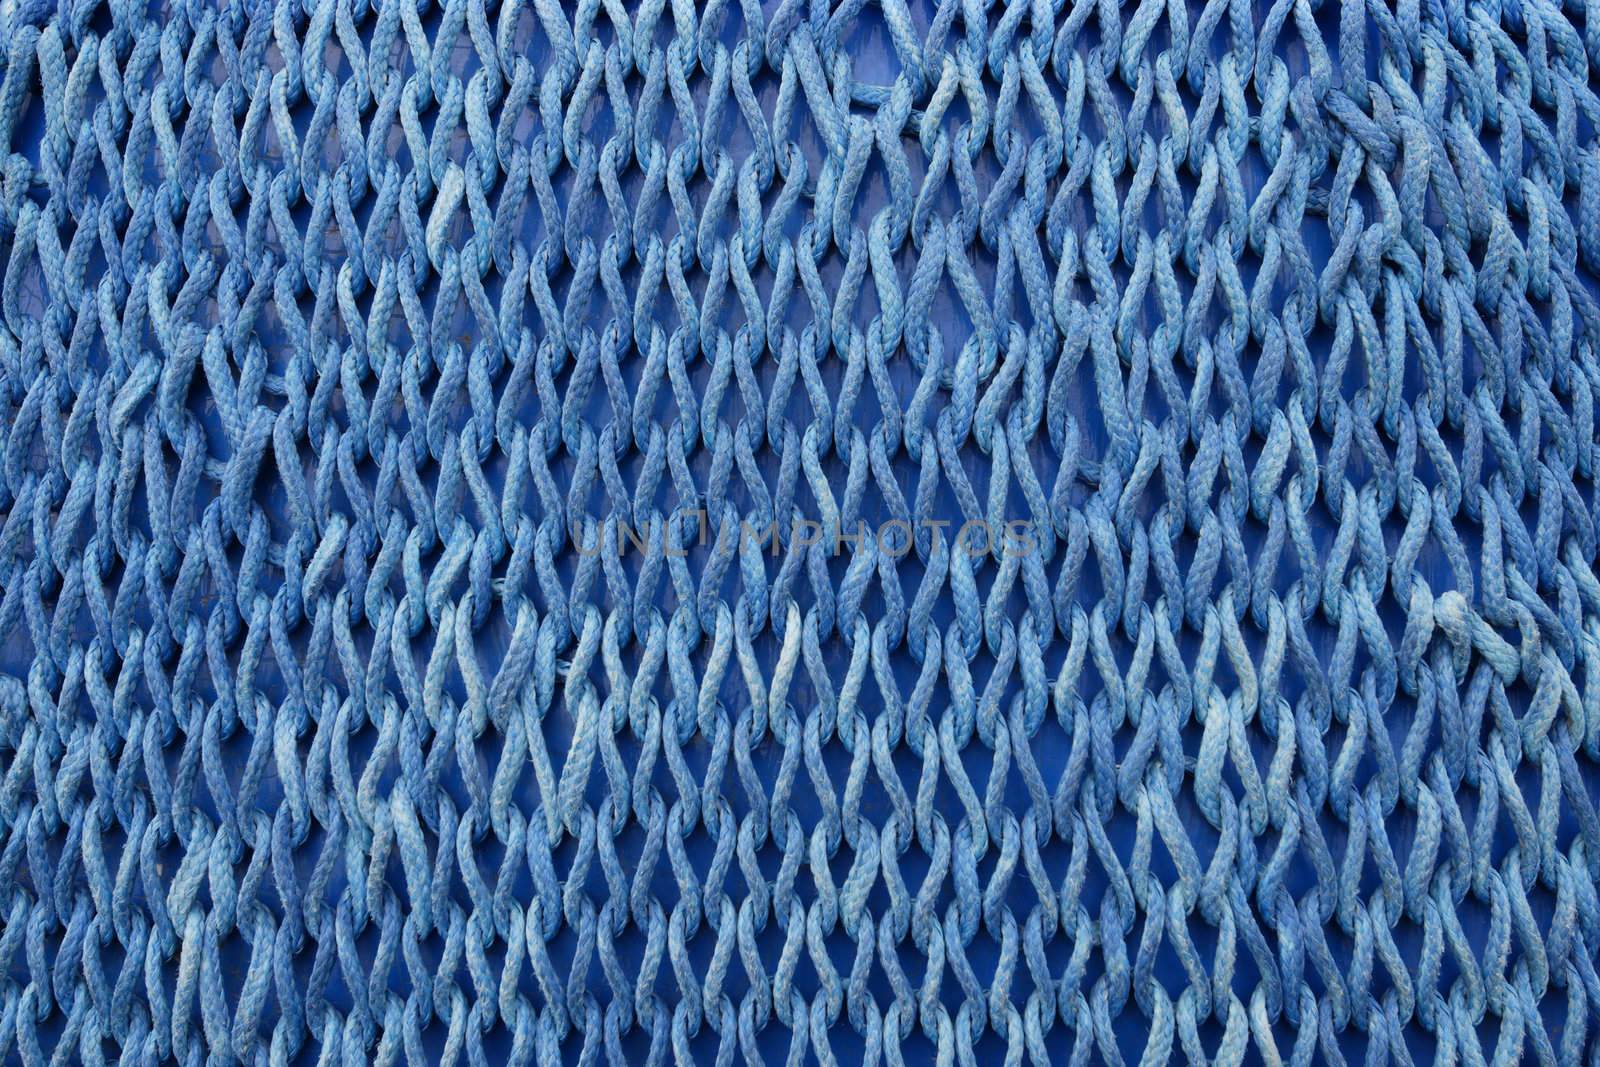 Photo of blue netting as a background.